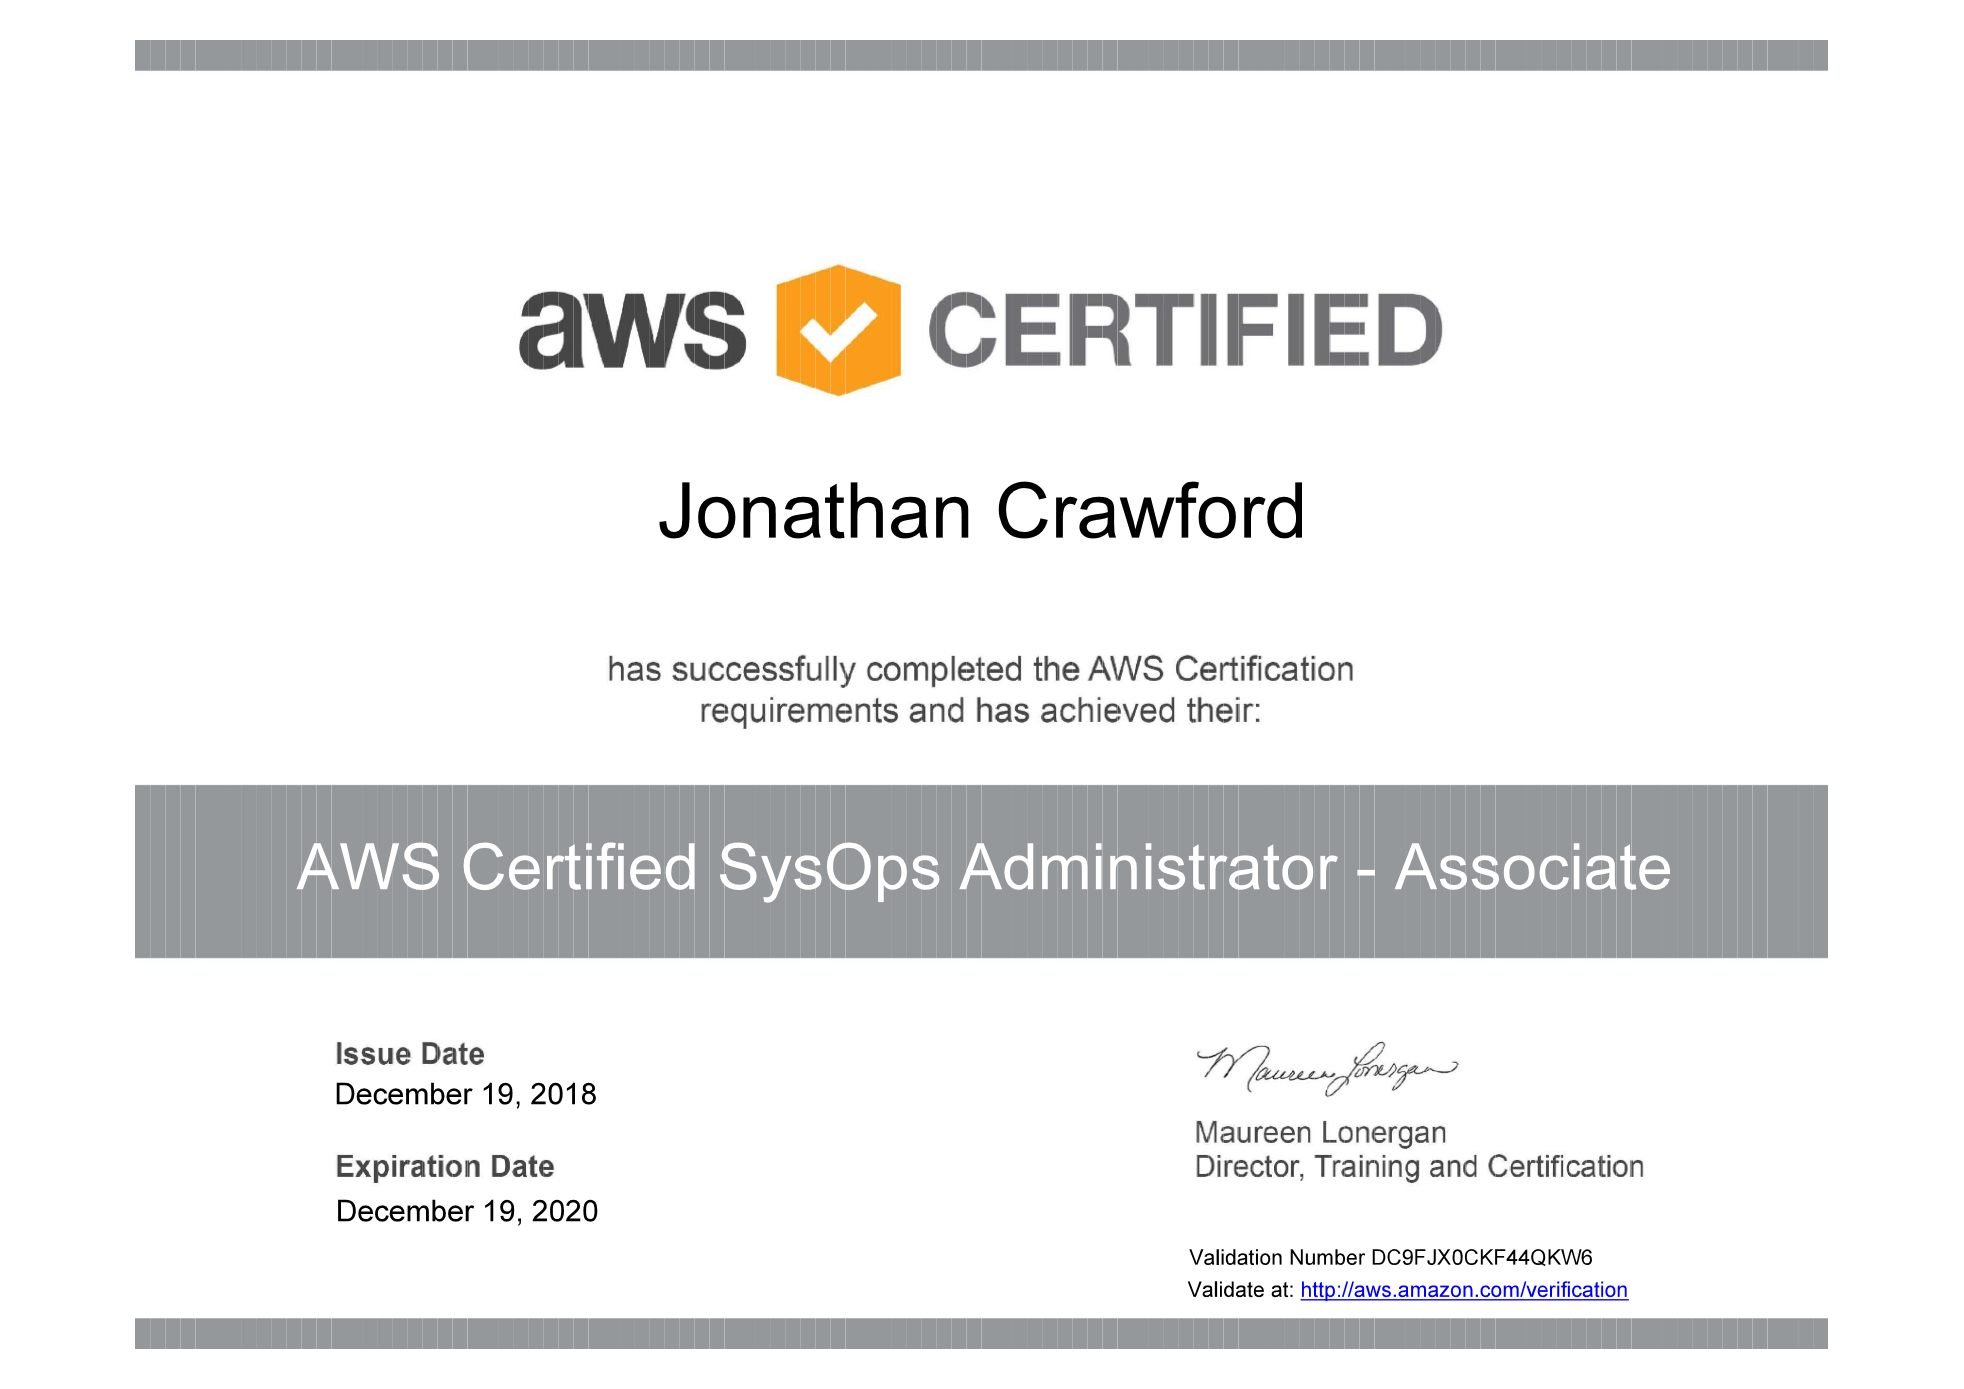 AWS Certified SysOps Administrator - Associate cert.